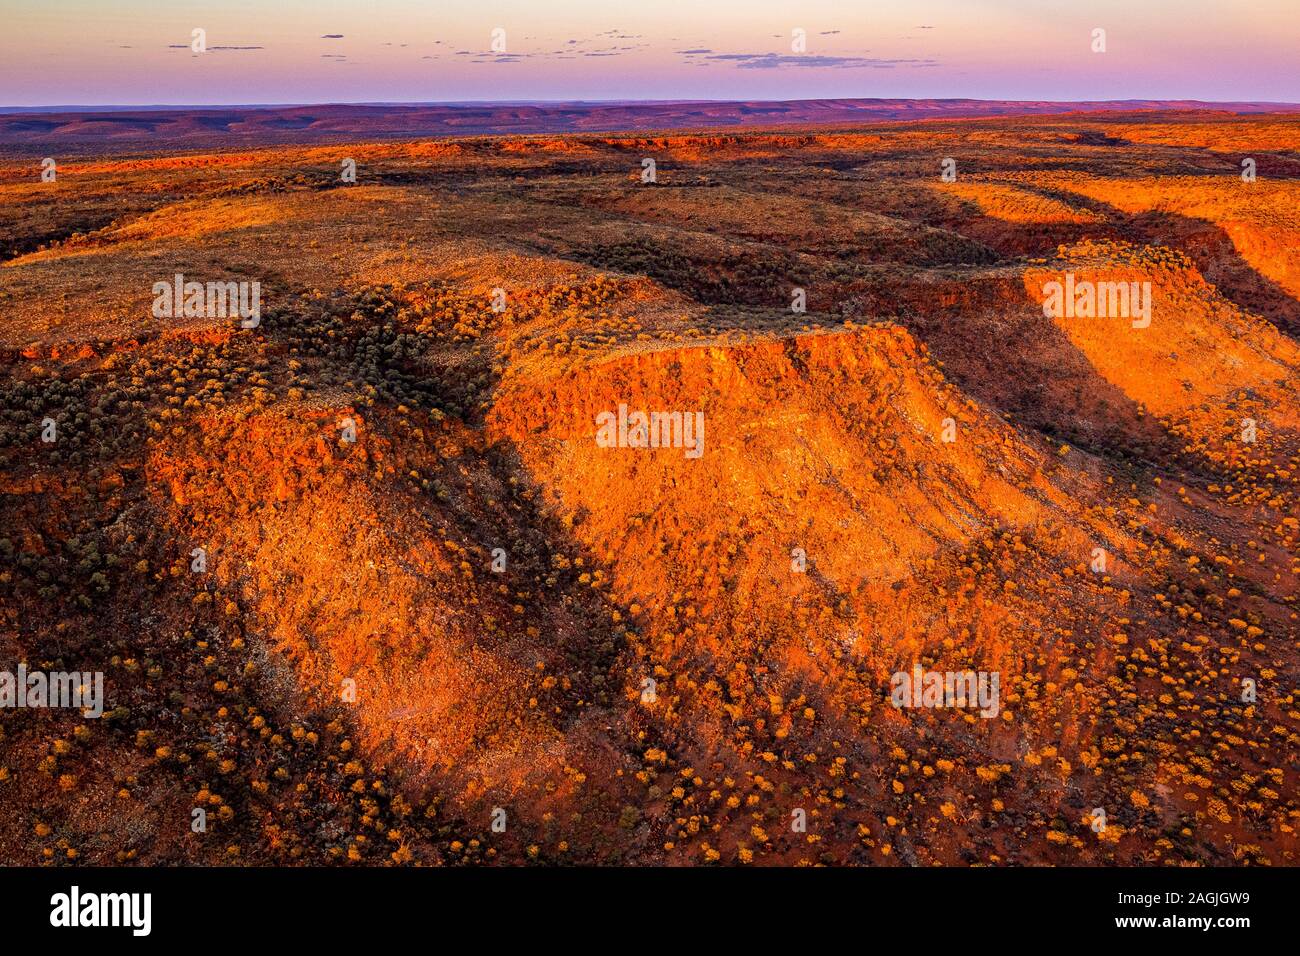 A remote Australian desert sunset near Kings Creek in central Australia. The George Gill Ranges dominate the landscape. Stock Photo